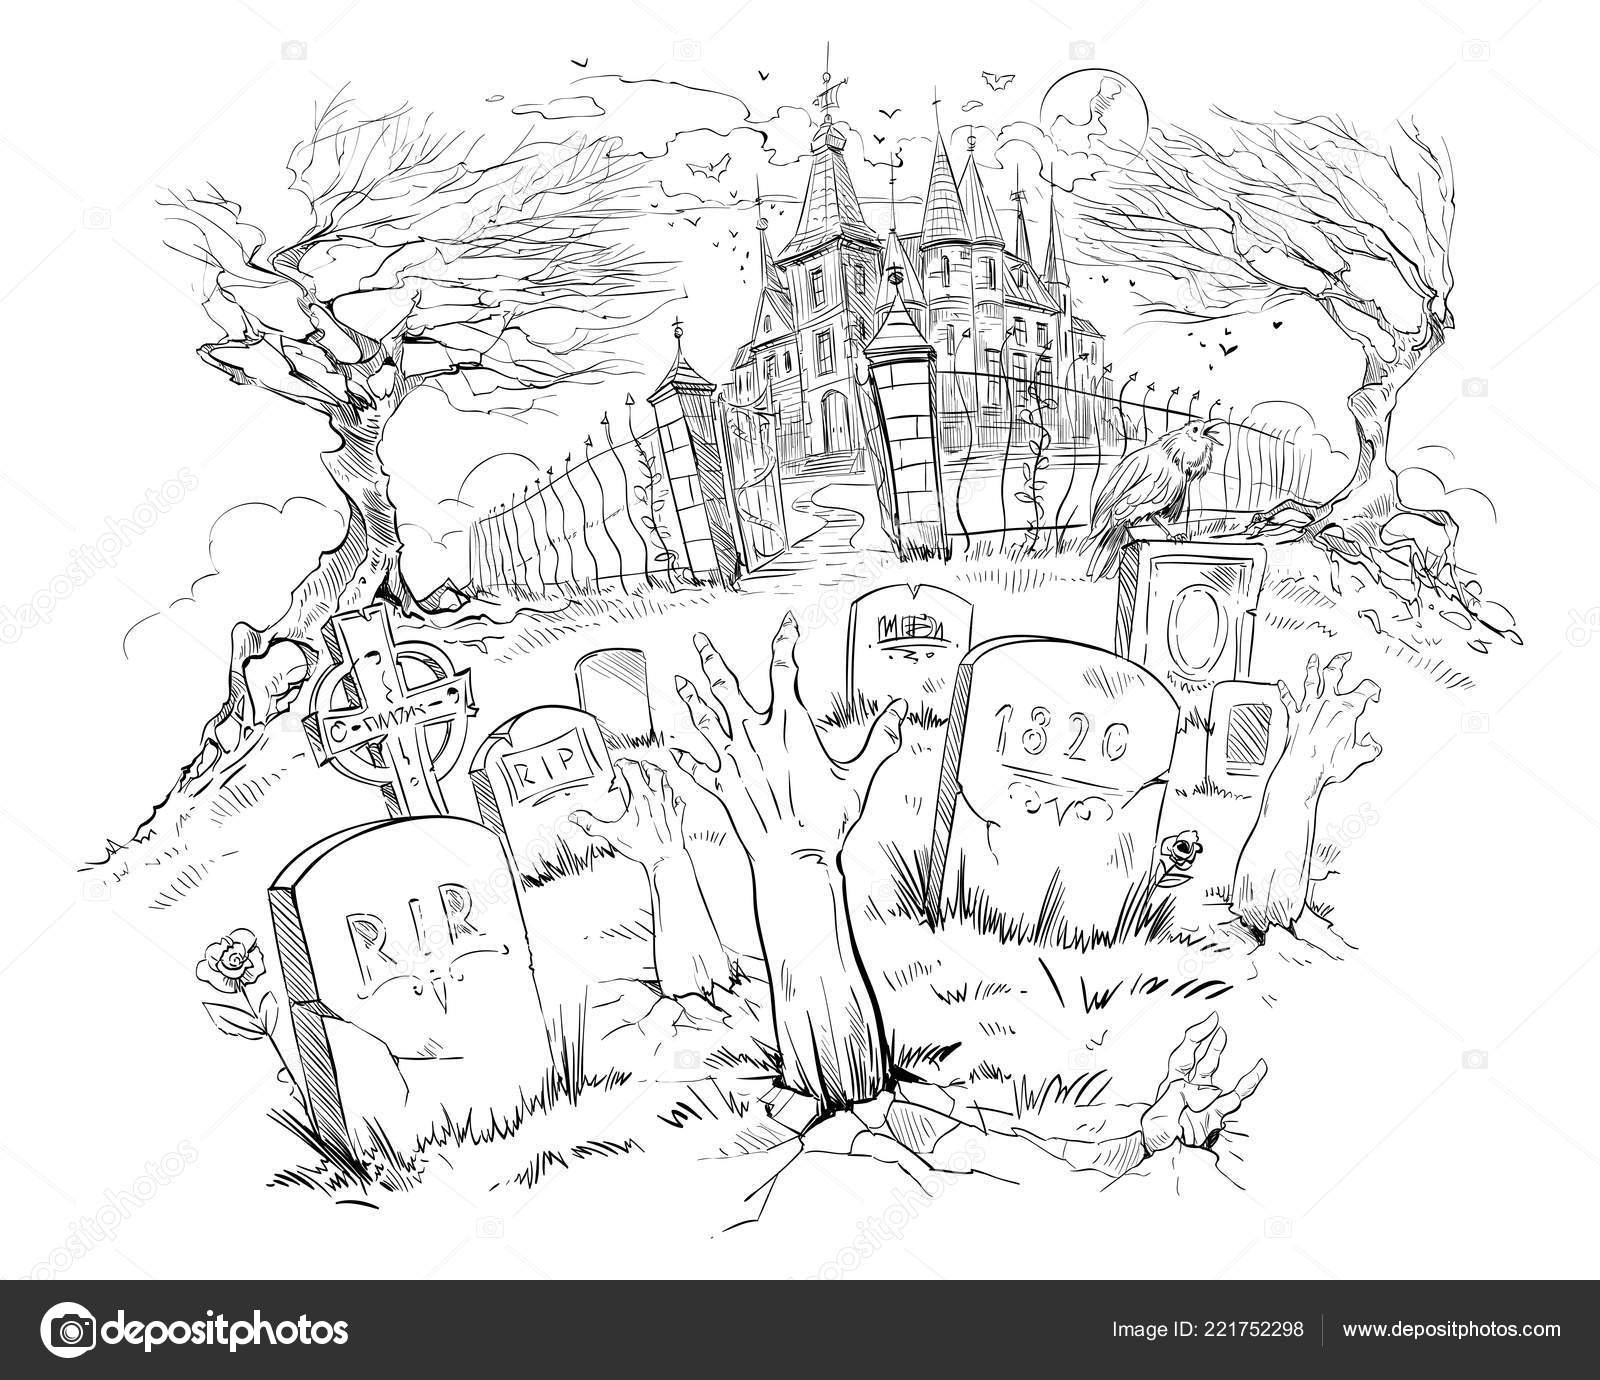 35+ Ideas For Cemetery Drawing Halloween | Inter Venus